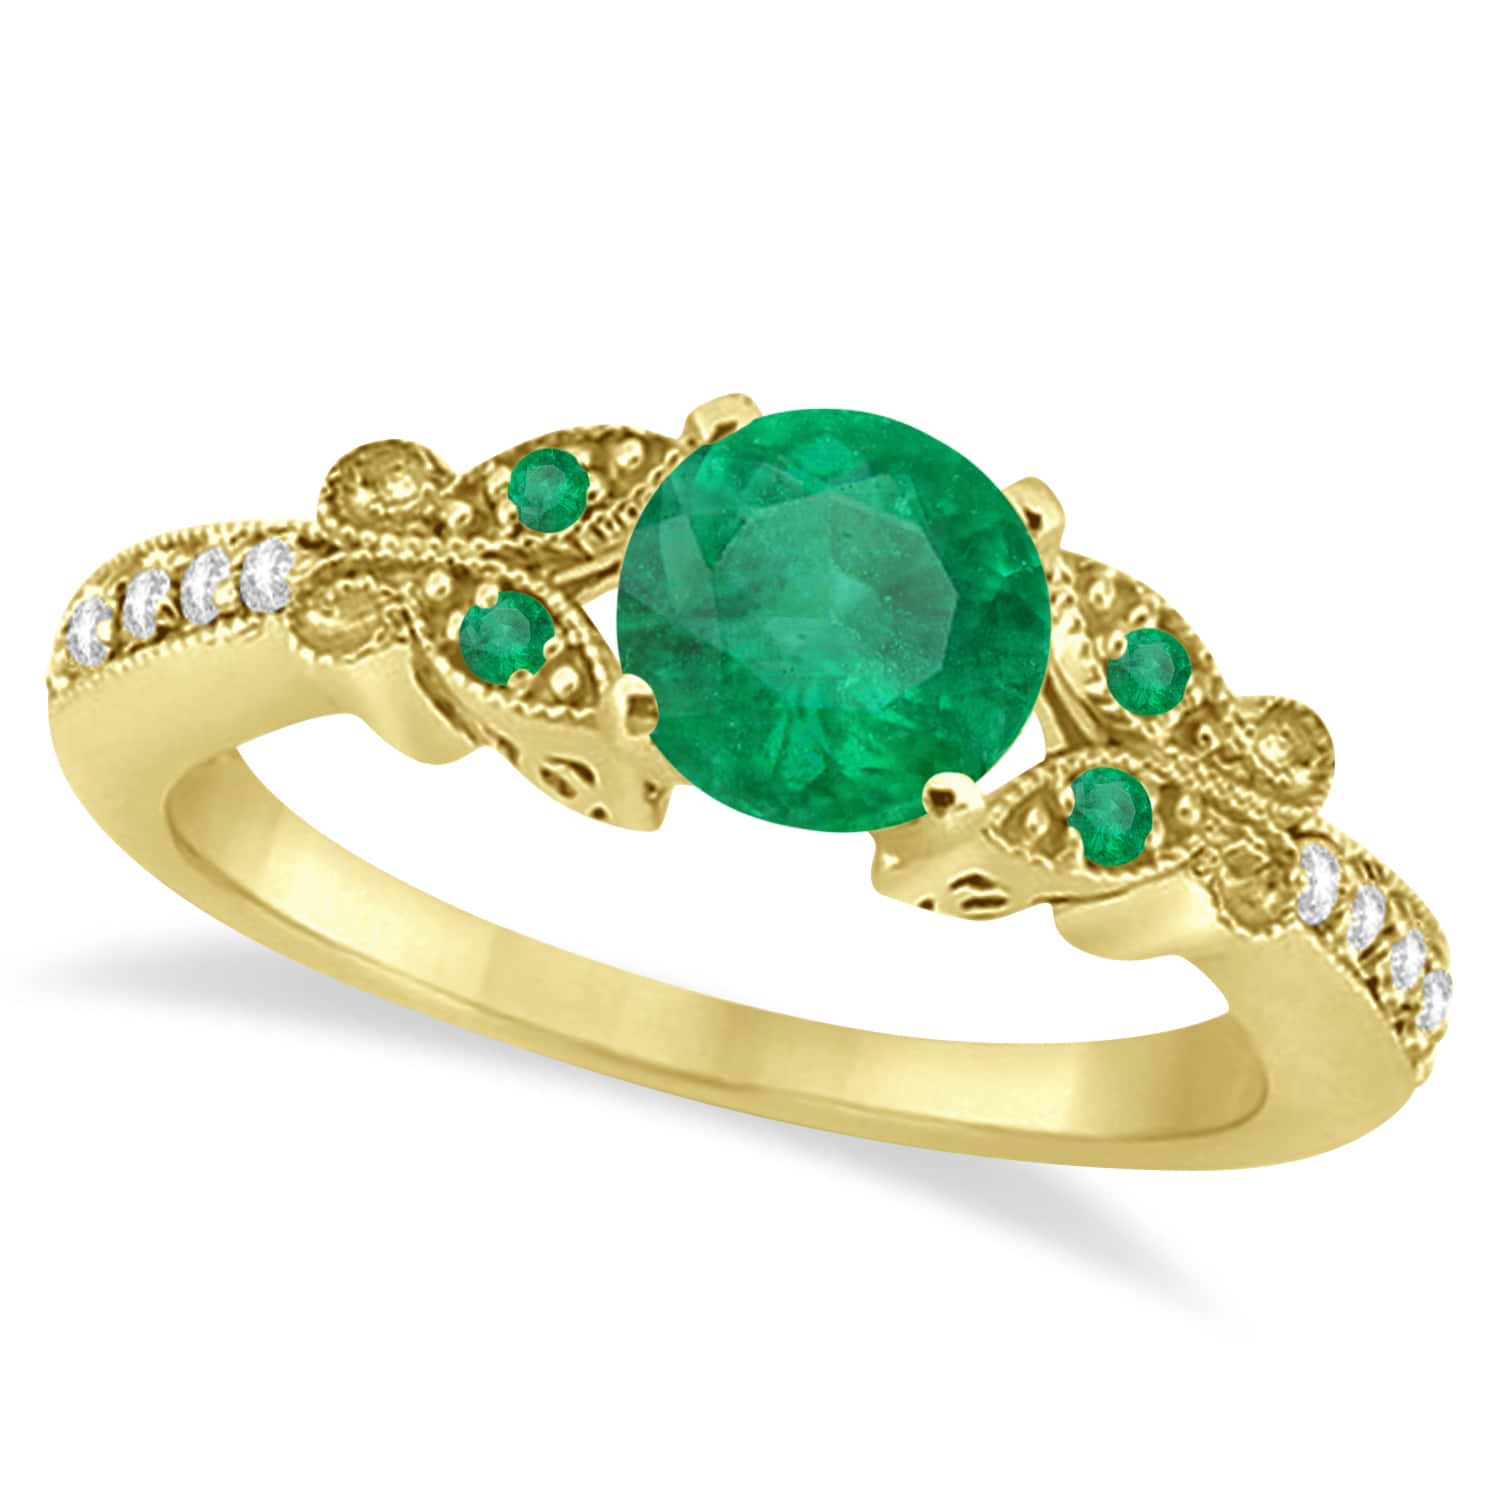 Butterfly Genuine Emerald & Diamond Engagement Ring 14K Yellow Gold 0.71ct